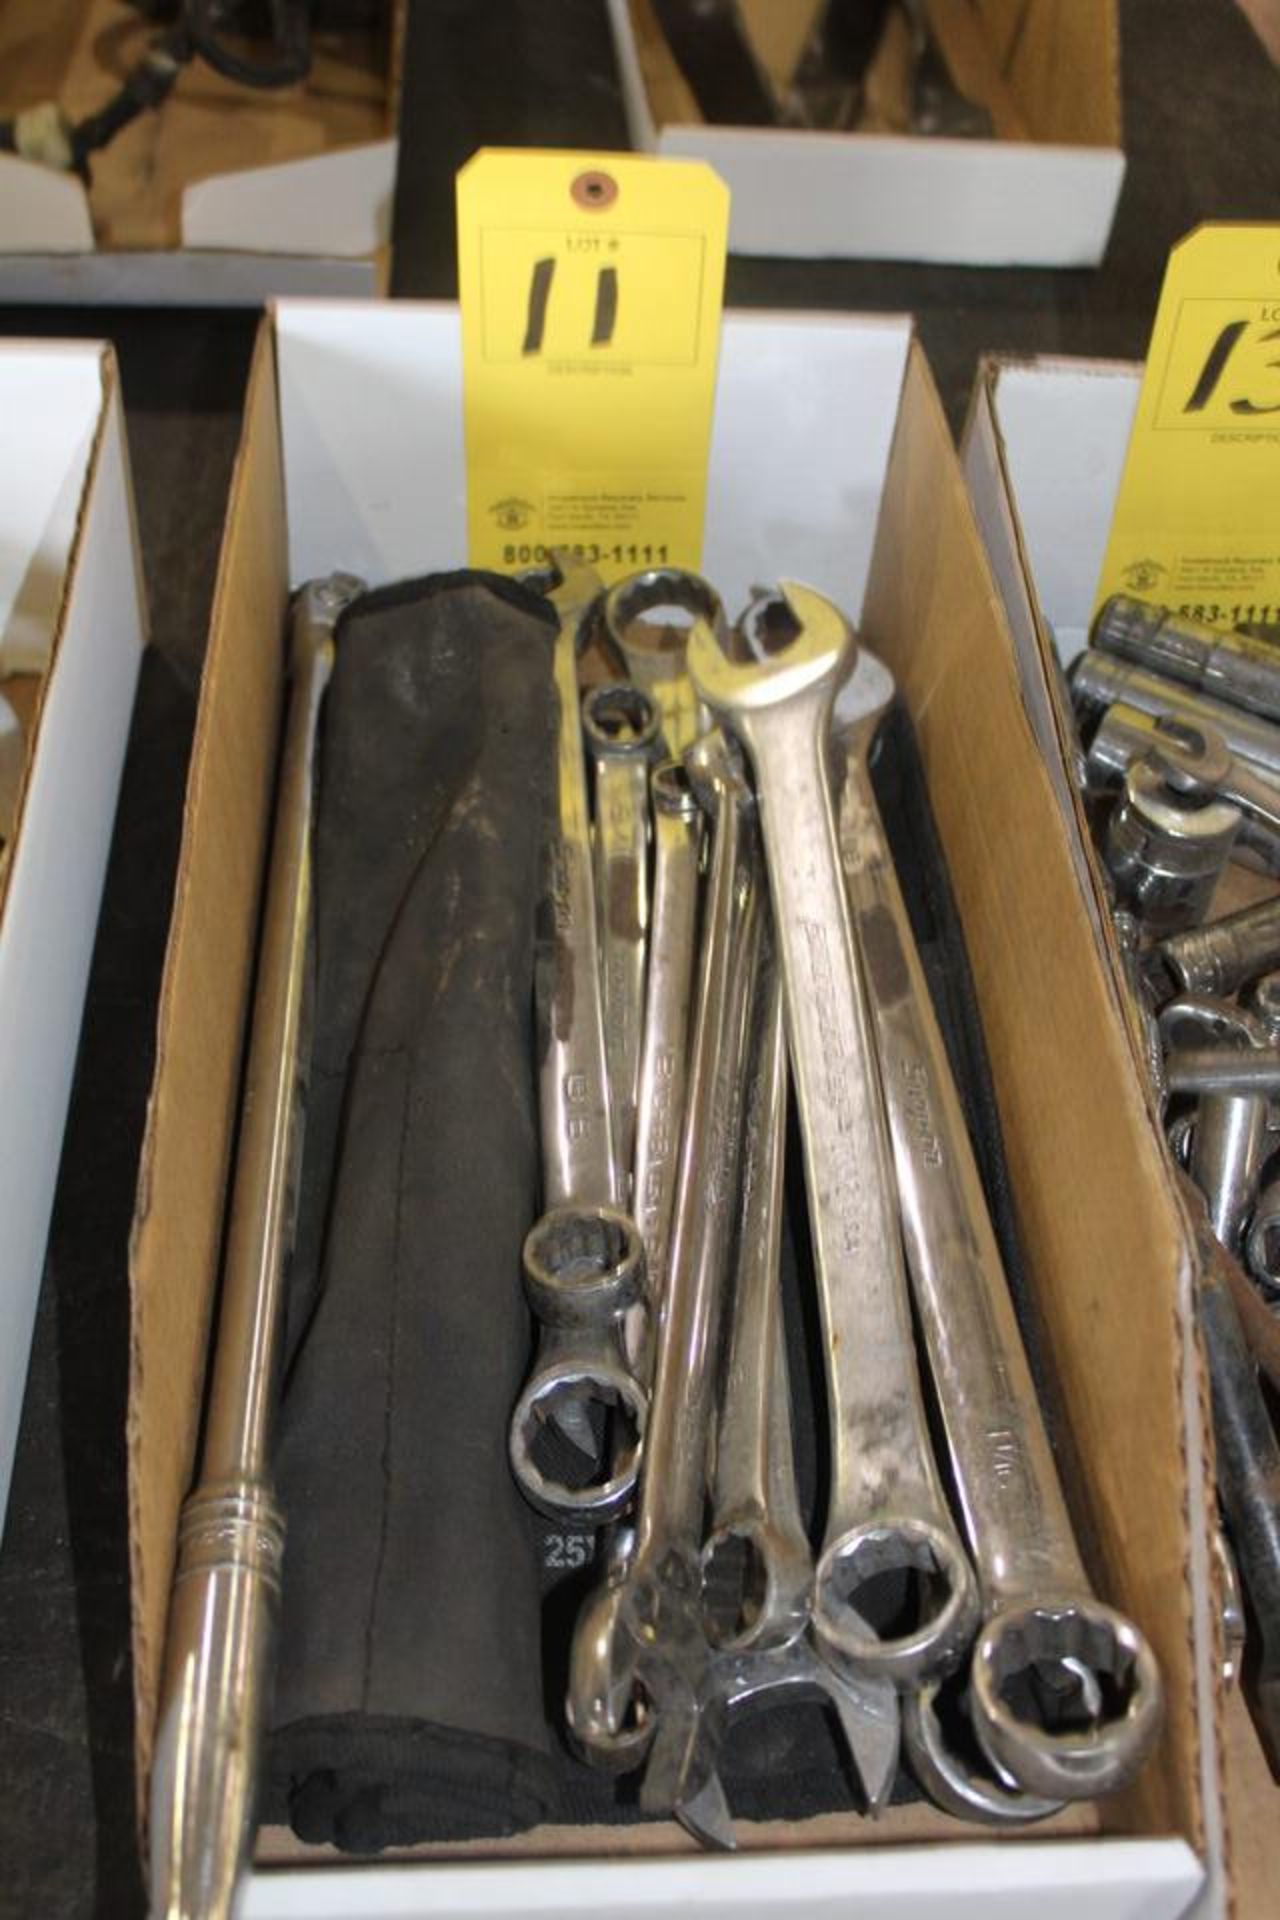 ASST WRENCHES